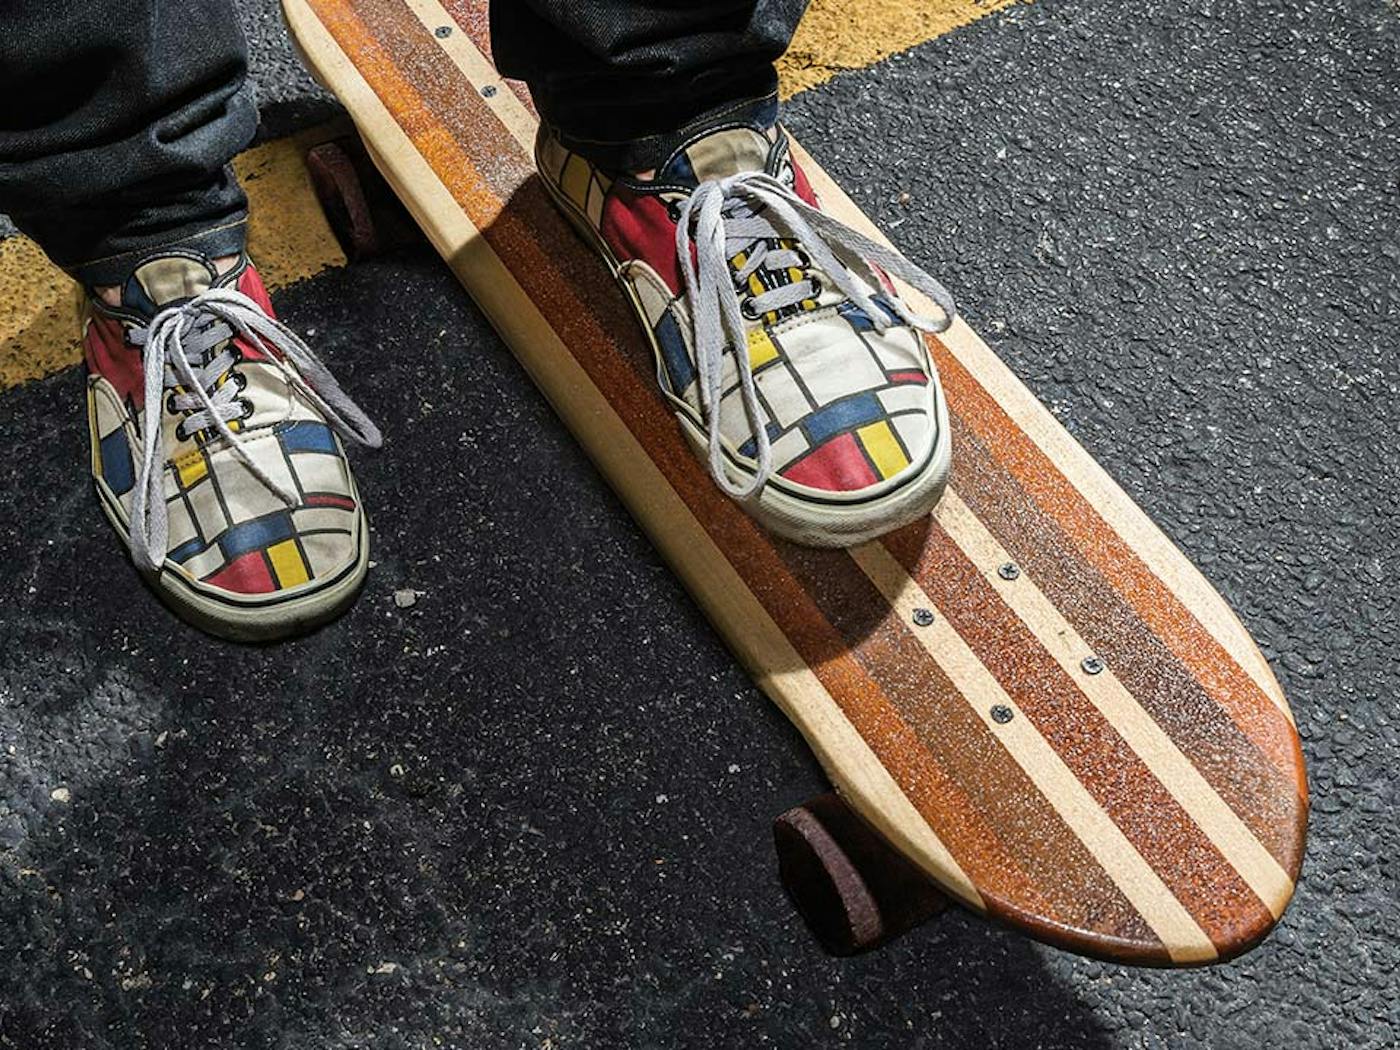 Tello скейтборд Side. Fortune Skateboards. All Skaters Дзепка. This Skateboard Shoe was designed in the USA. Side projects